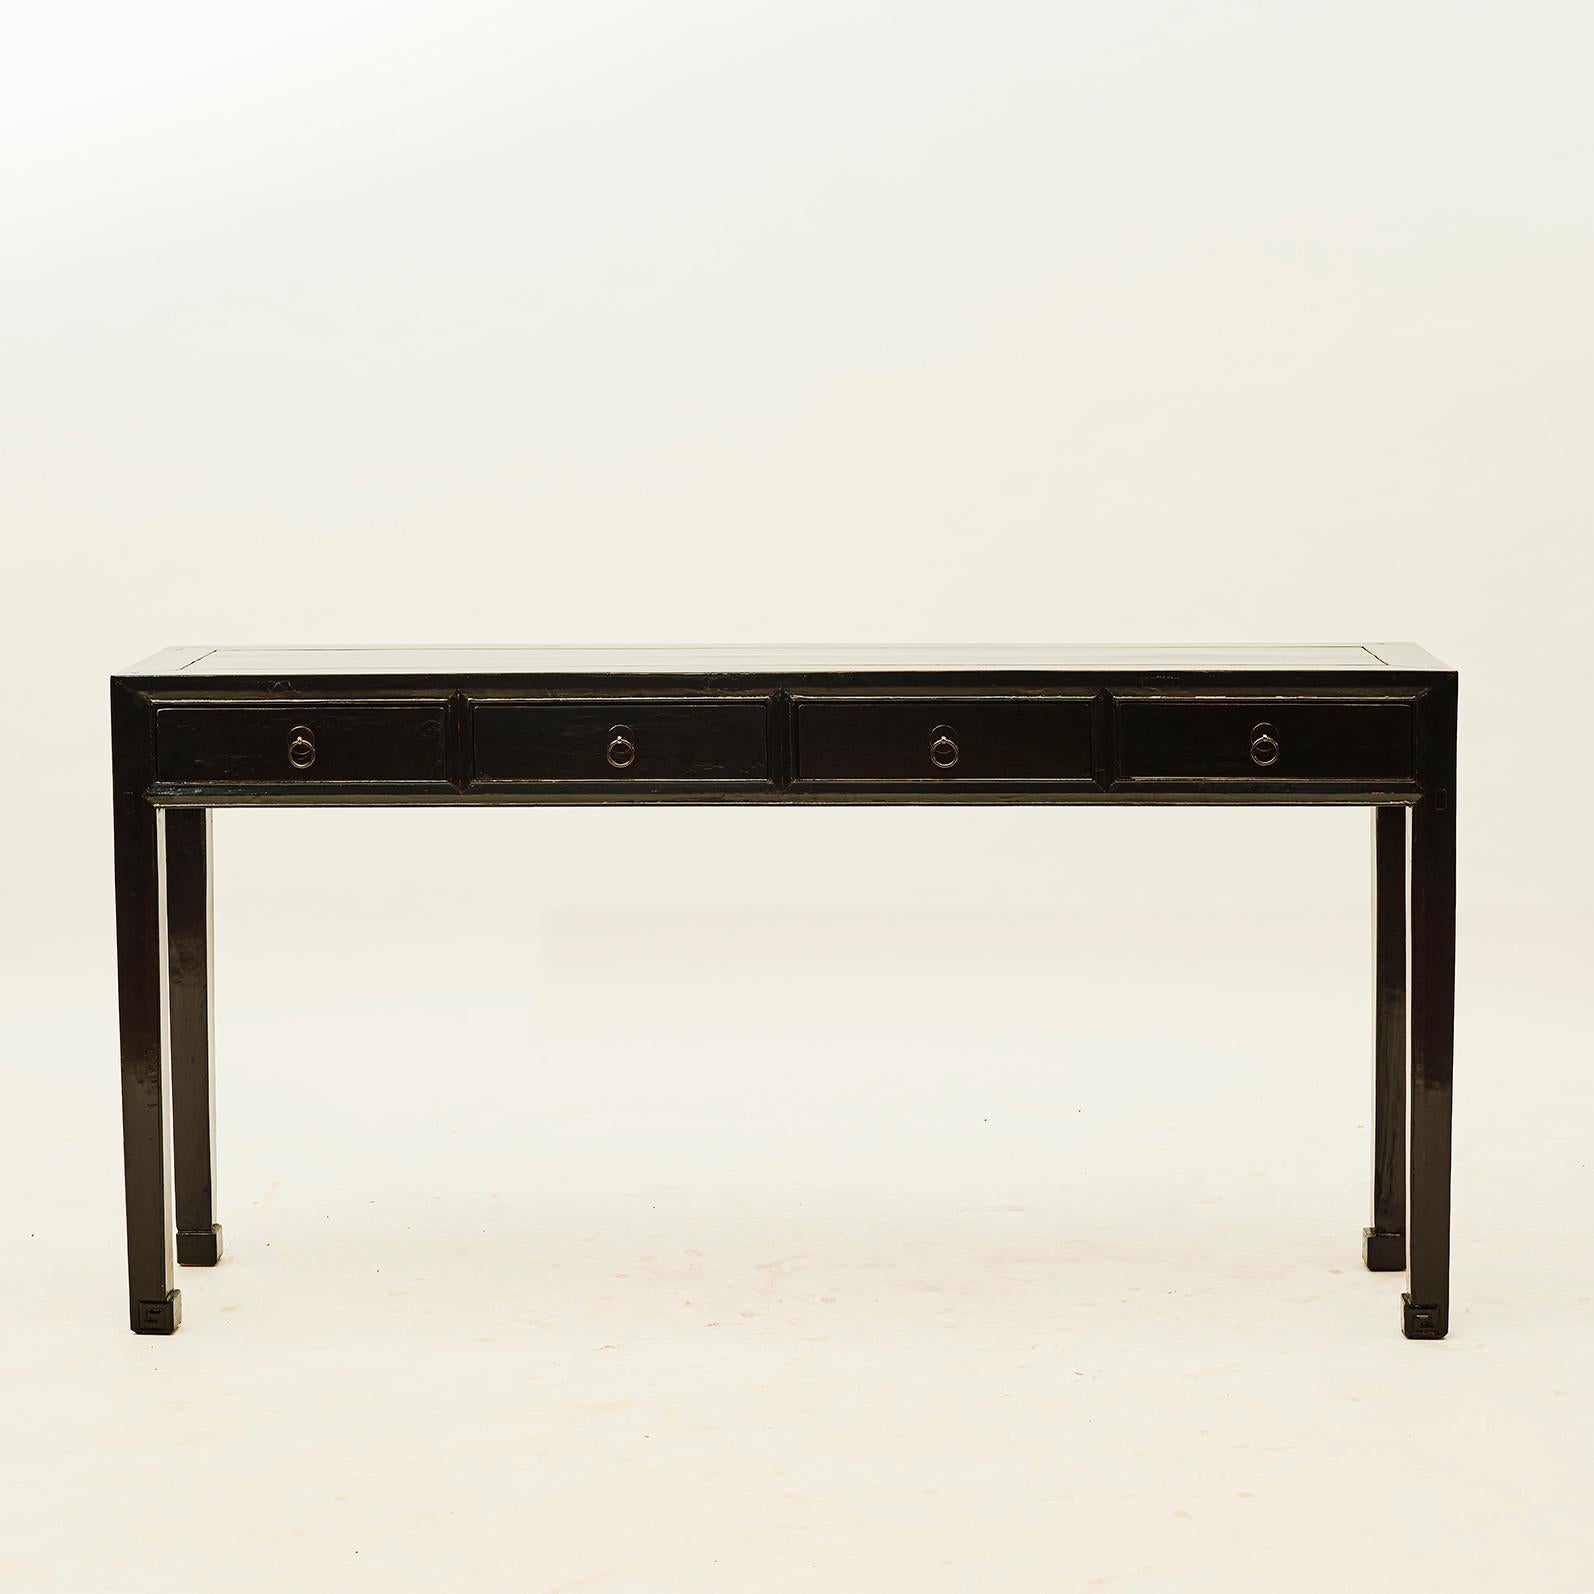 Black lacquer console table with 4 drawers, Art Deco.
Well suited both against a wall, behind sofa or as standalone table.
From Shandong Province, China, 1900-1920.